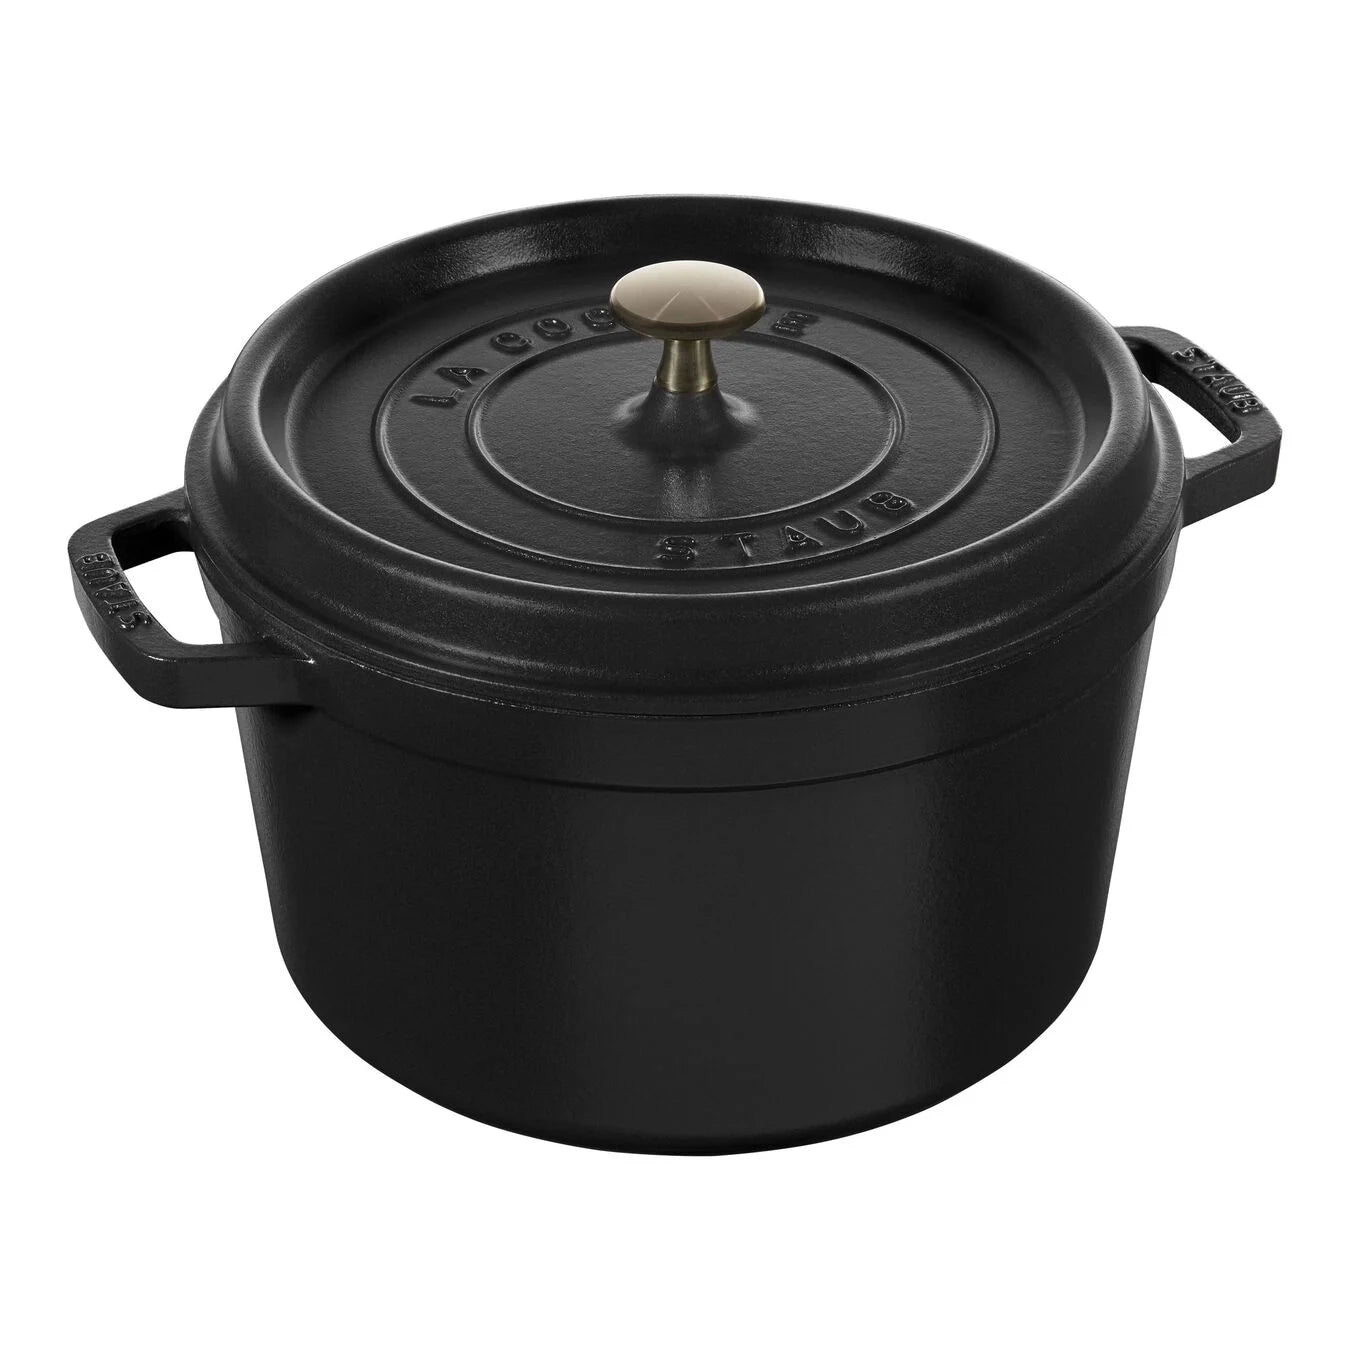 Staub's Popular Cocotte Dutch Oven Is on Sale for $100